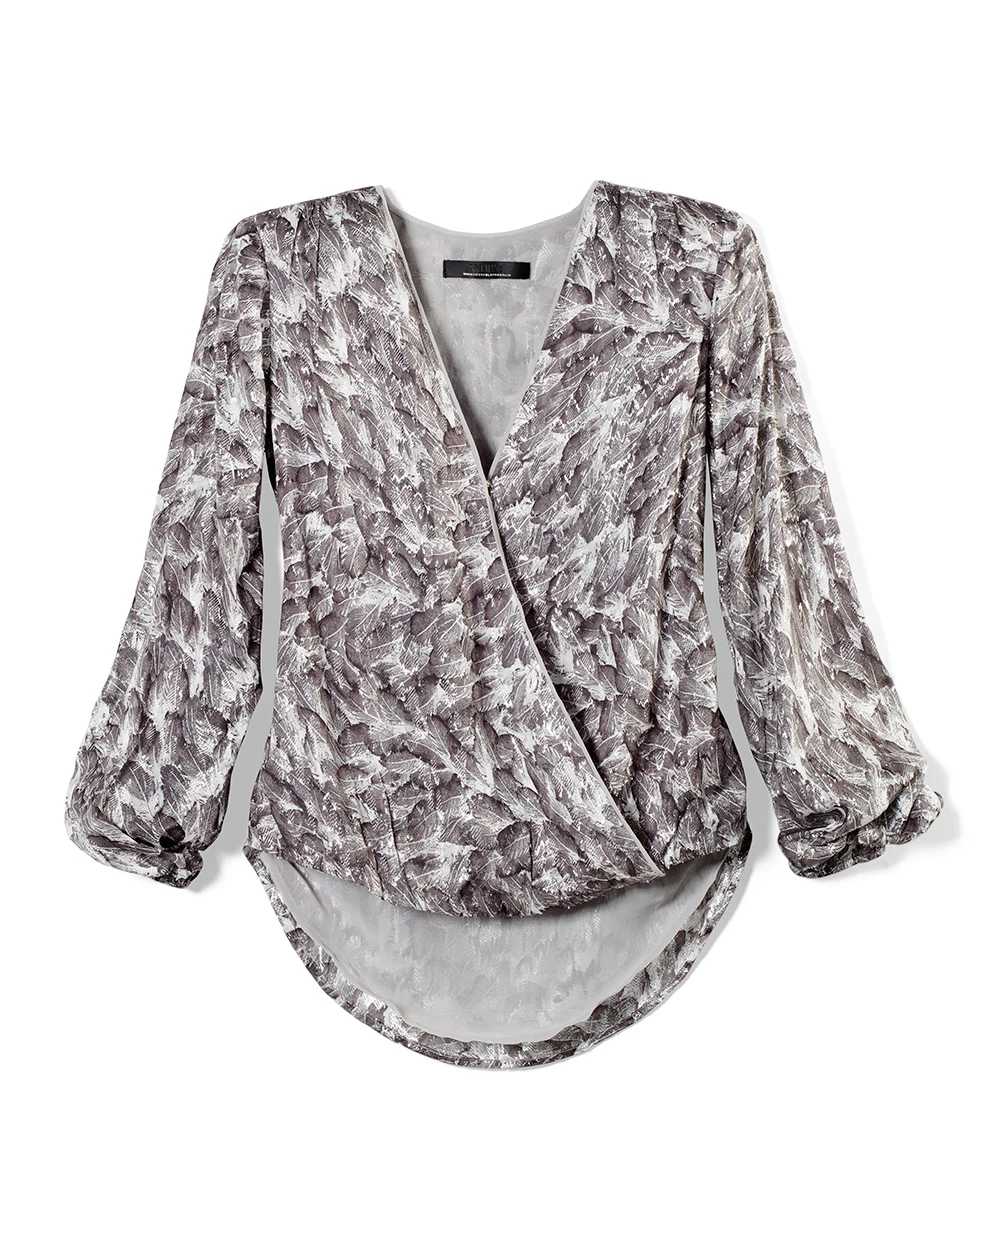 Feather Print Surplice Blouse click to view larger image.